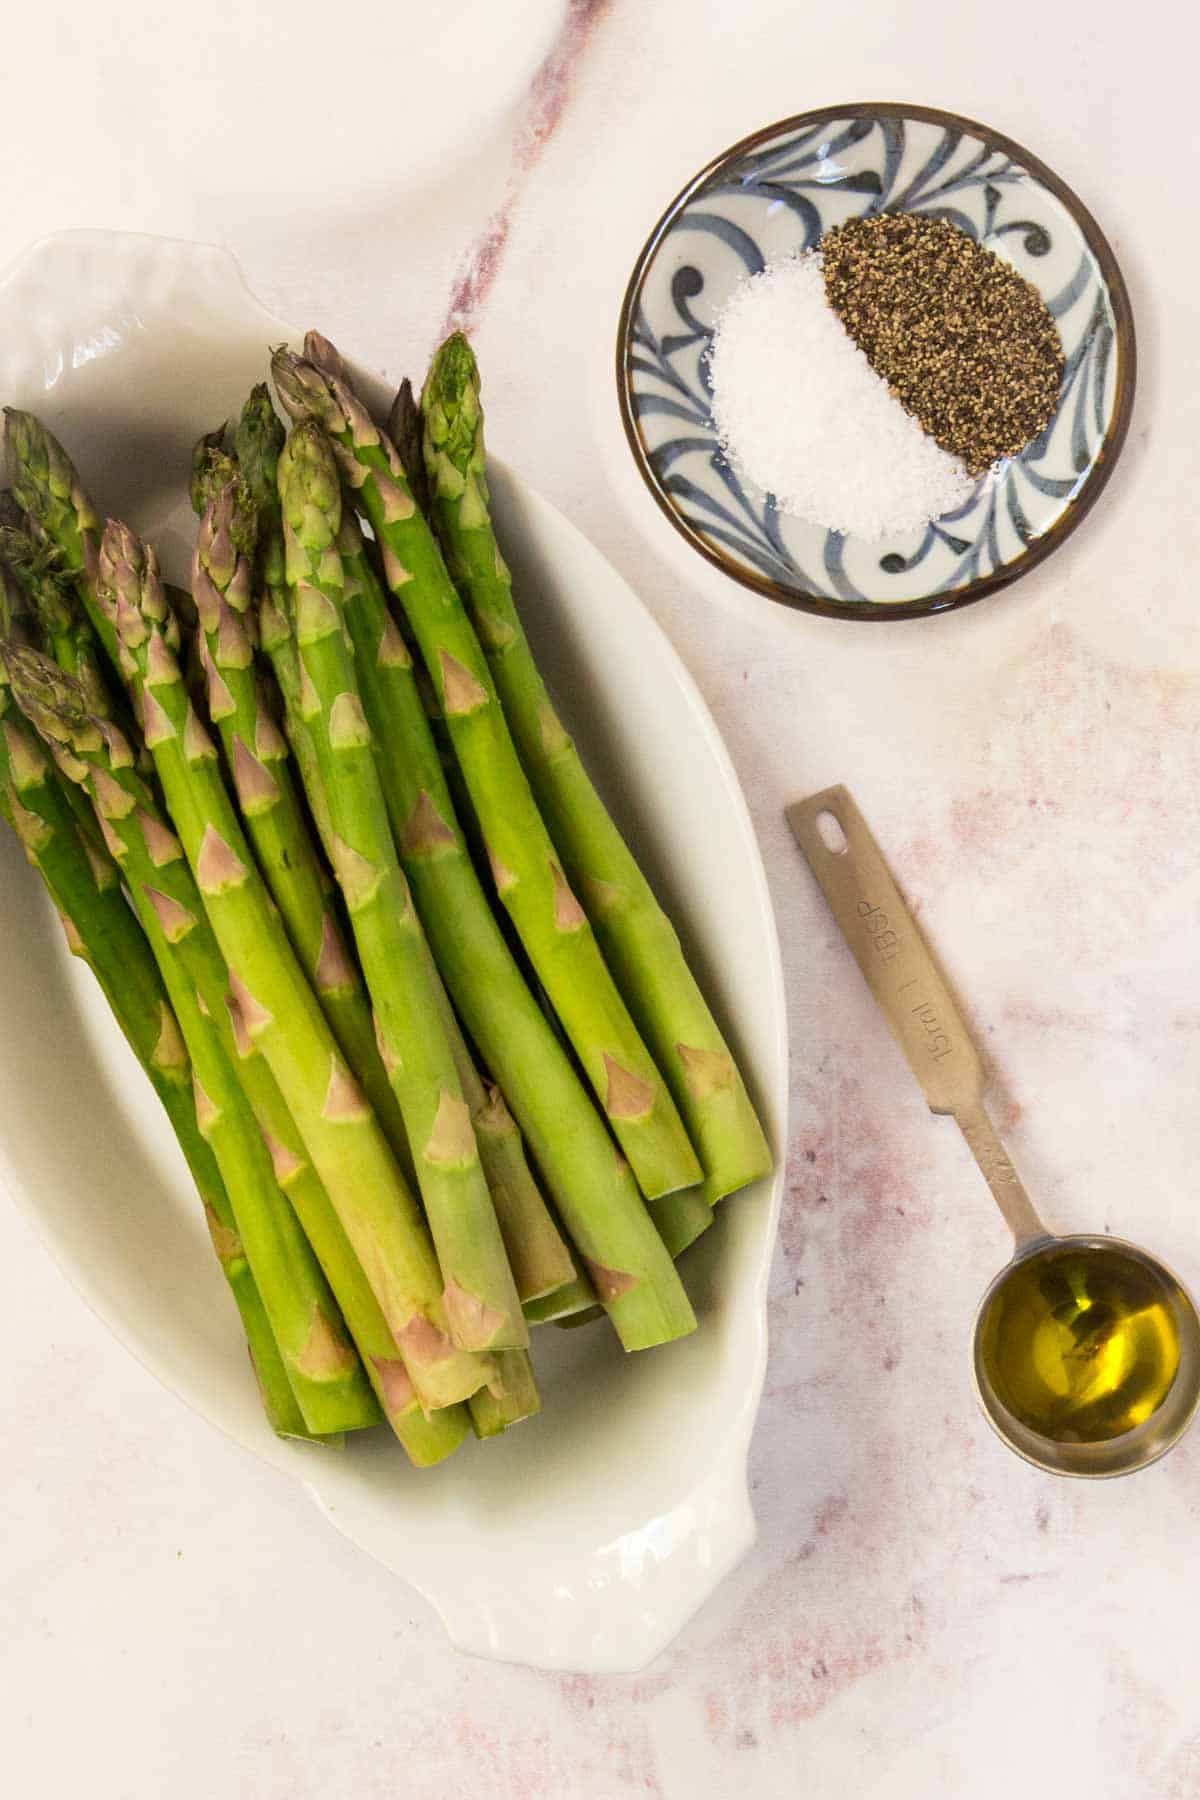 Ingredients to make roasted asparagus on a marble countertop.